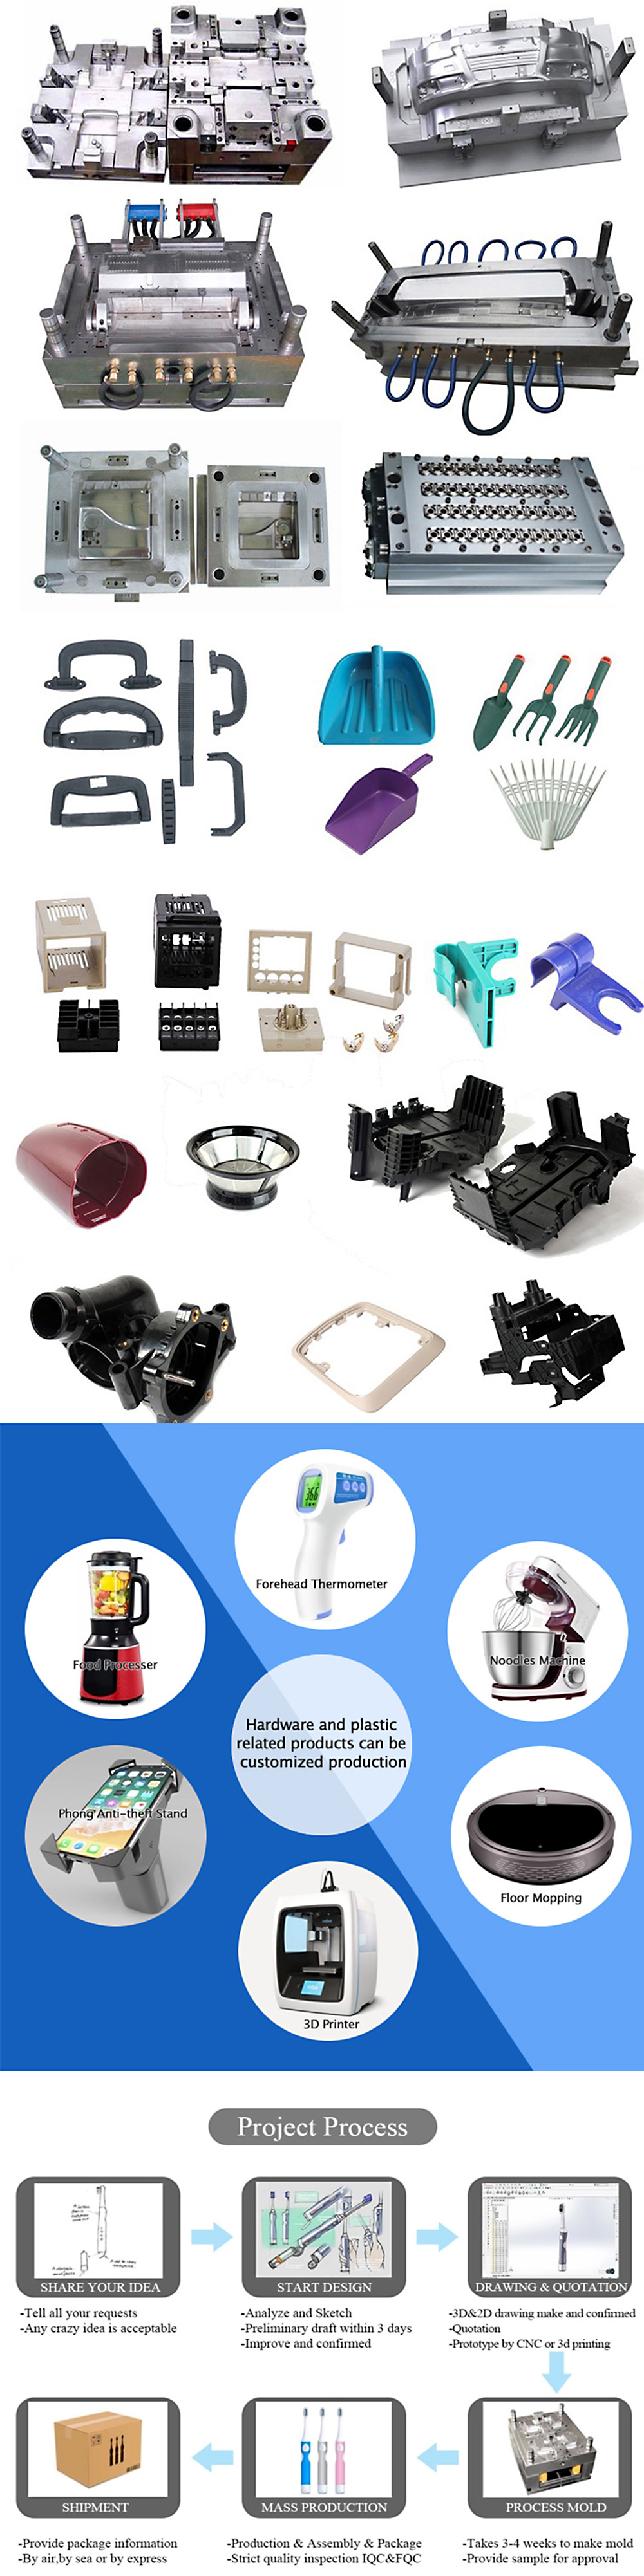 injection mold plastic | injection mold price | injection molding companies